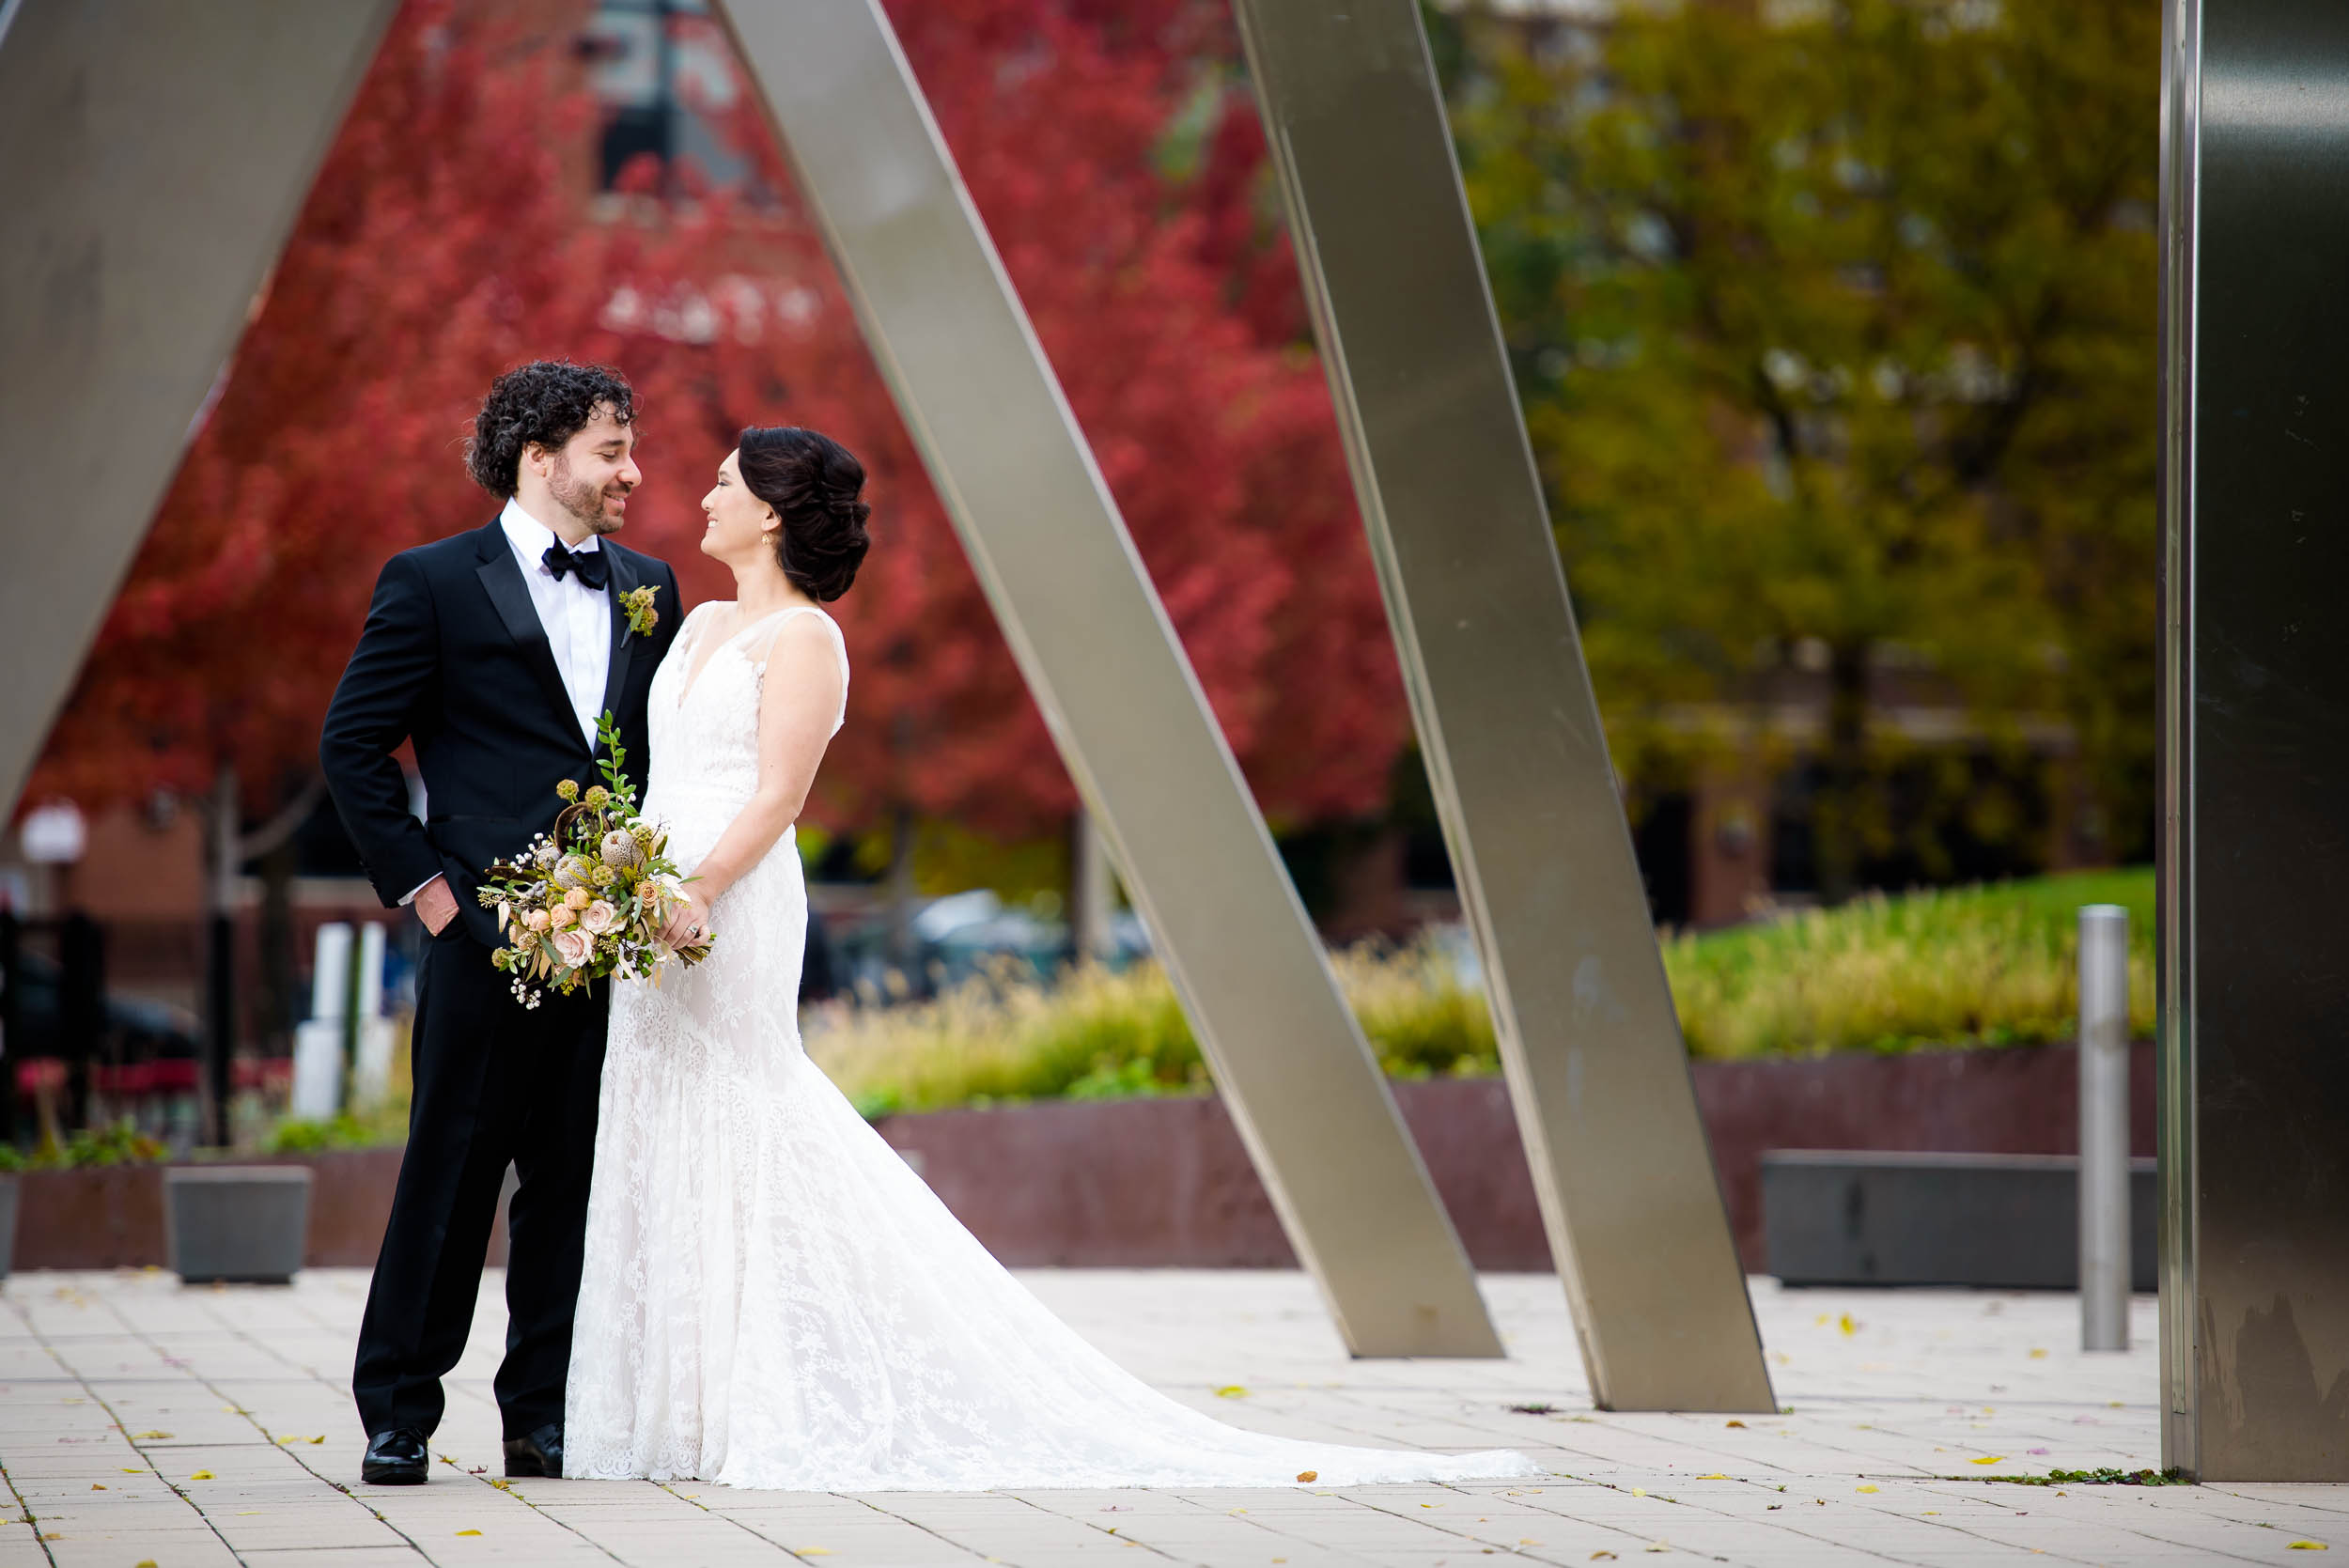 Modern wedding photo of bride and groom at Mary Bartelme Park Chicago.